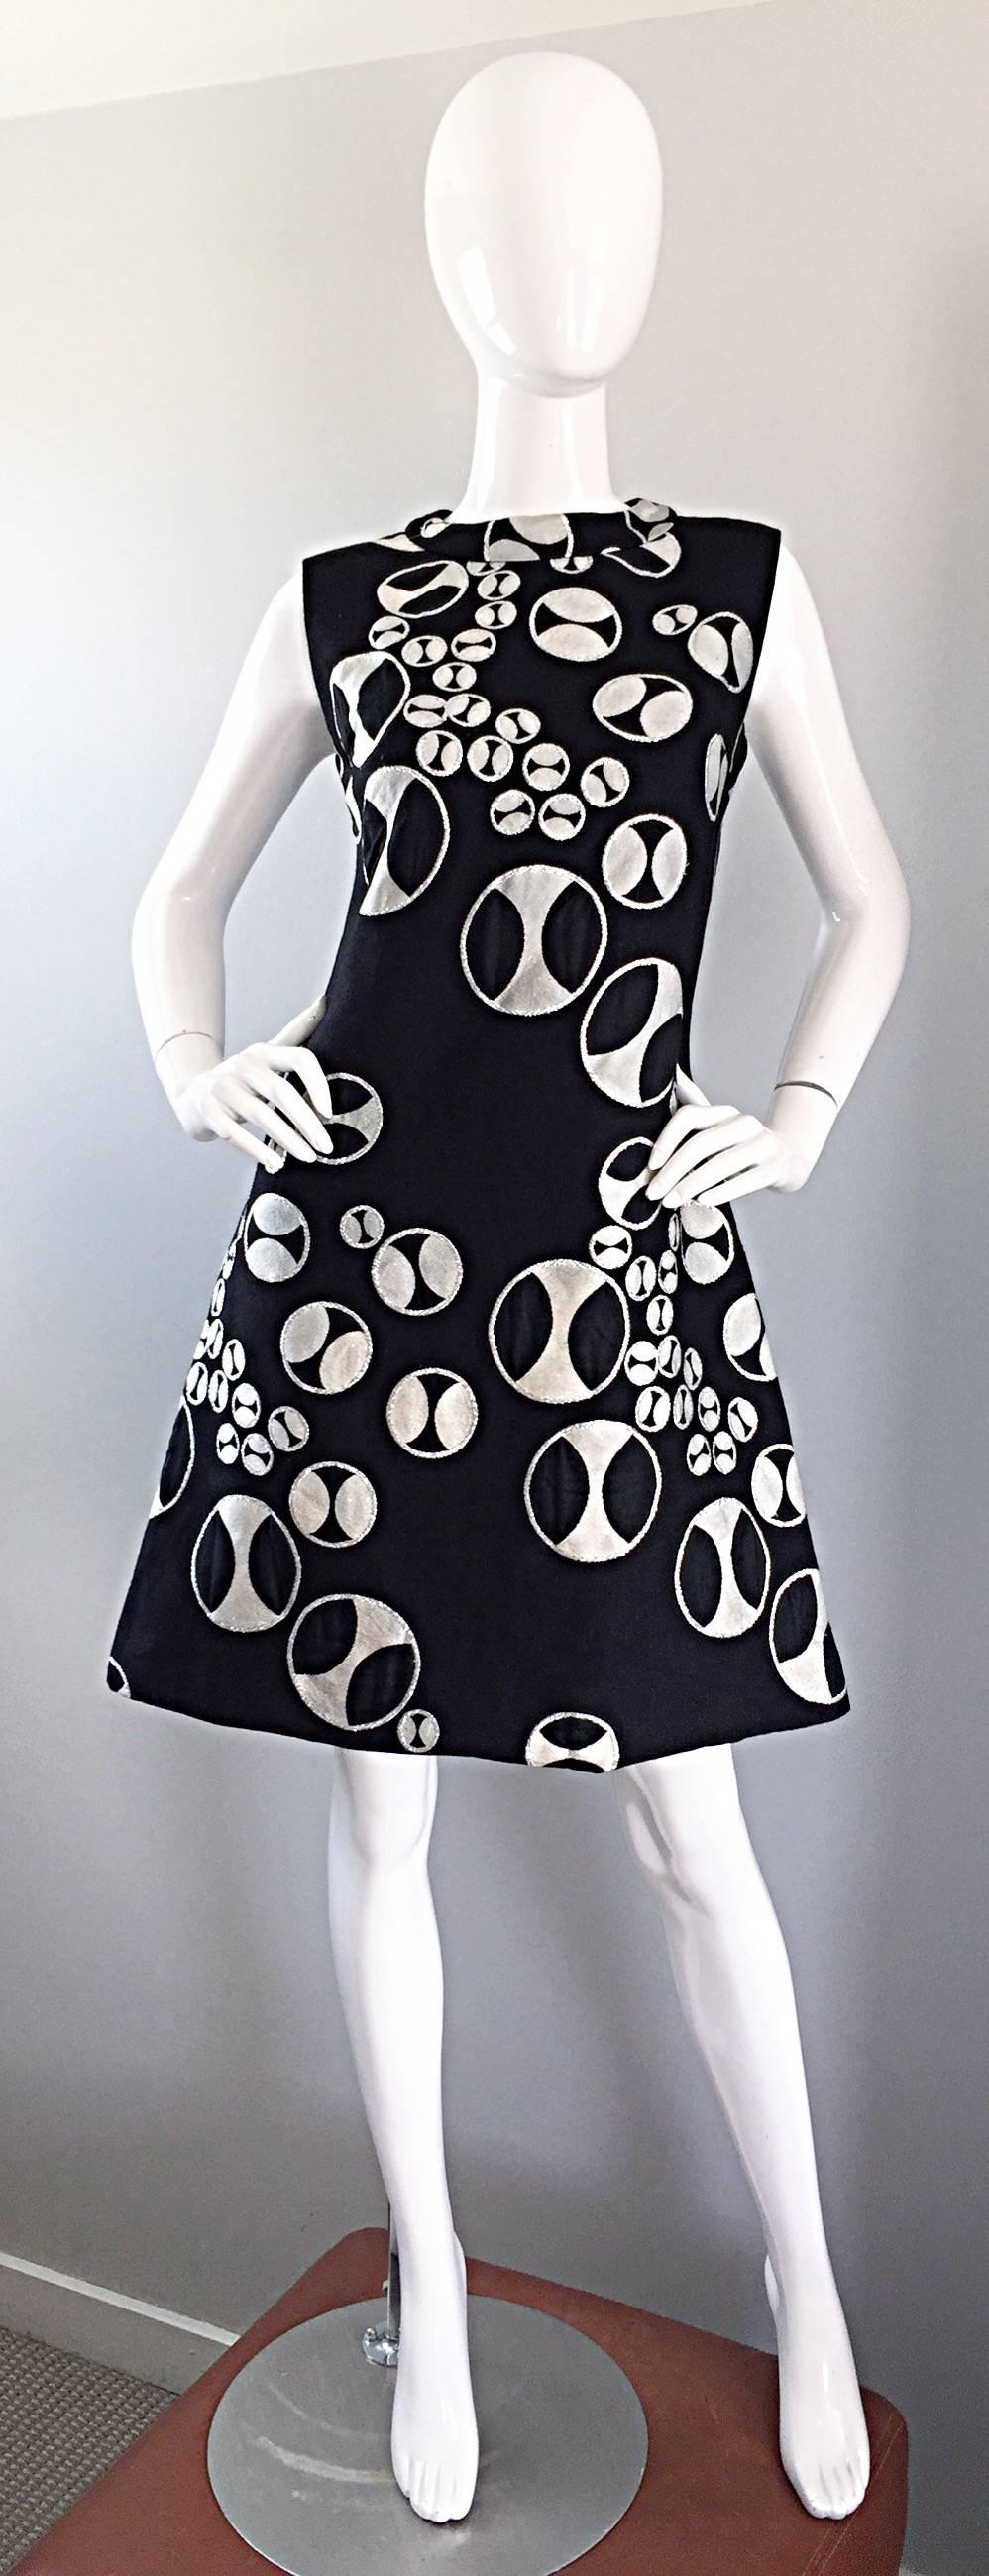 Rare and fabulous 60s vintage HELGA COUTURE black, silver metallic, and white A - Line Space Age sleeveless dress! Features an Op-Art print that looks like buttons printed throughout. Exaggerated A-Line fit is super flattering on! Full metal zipper